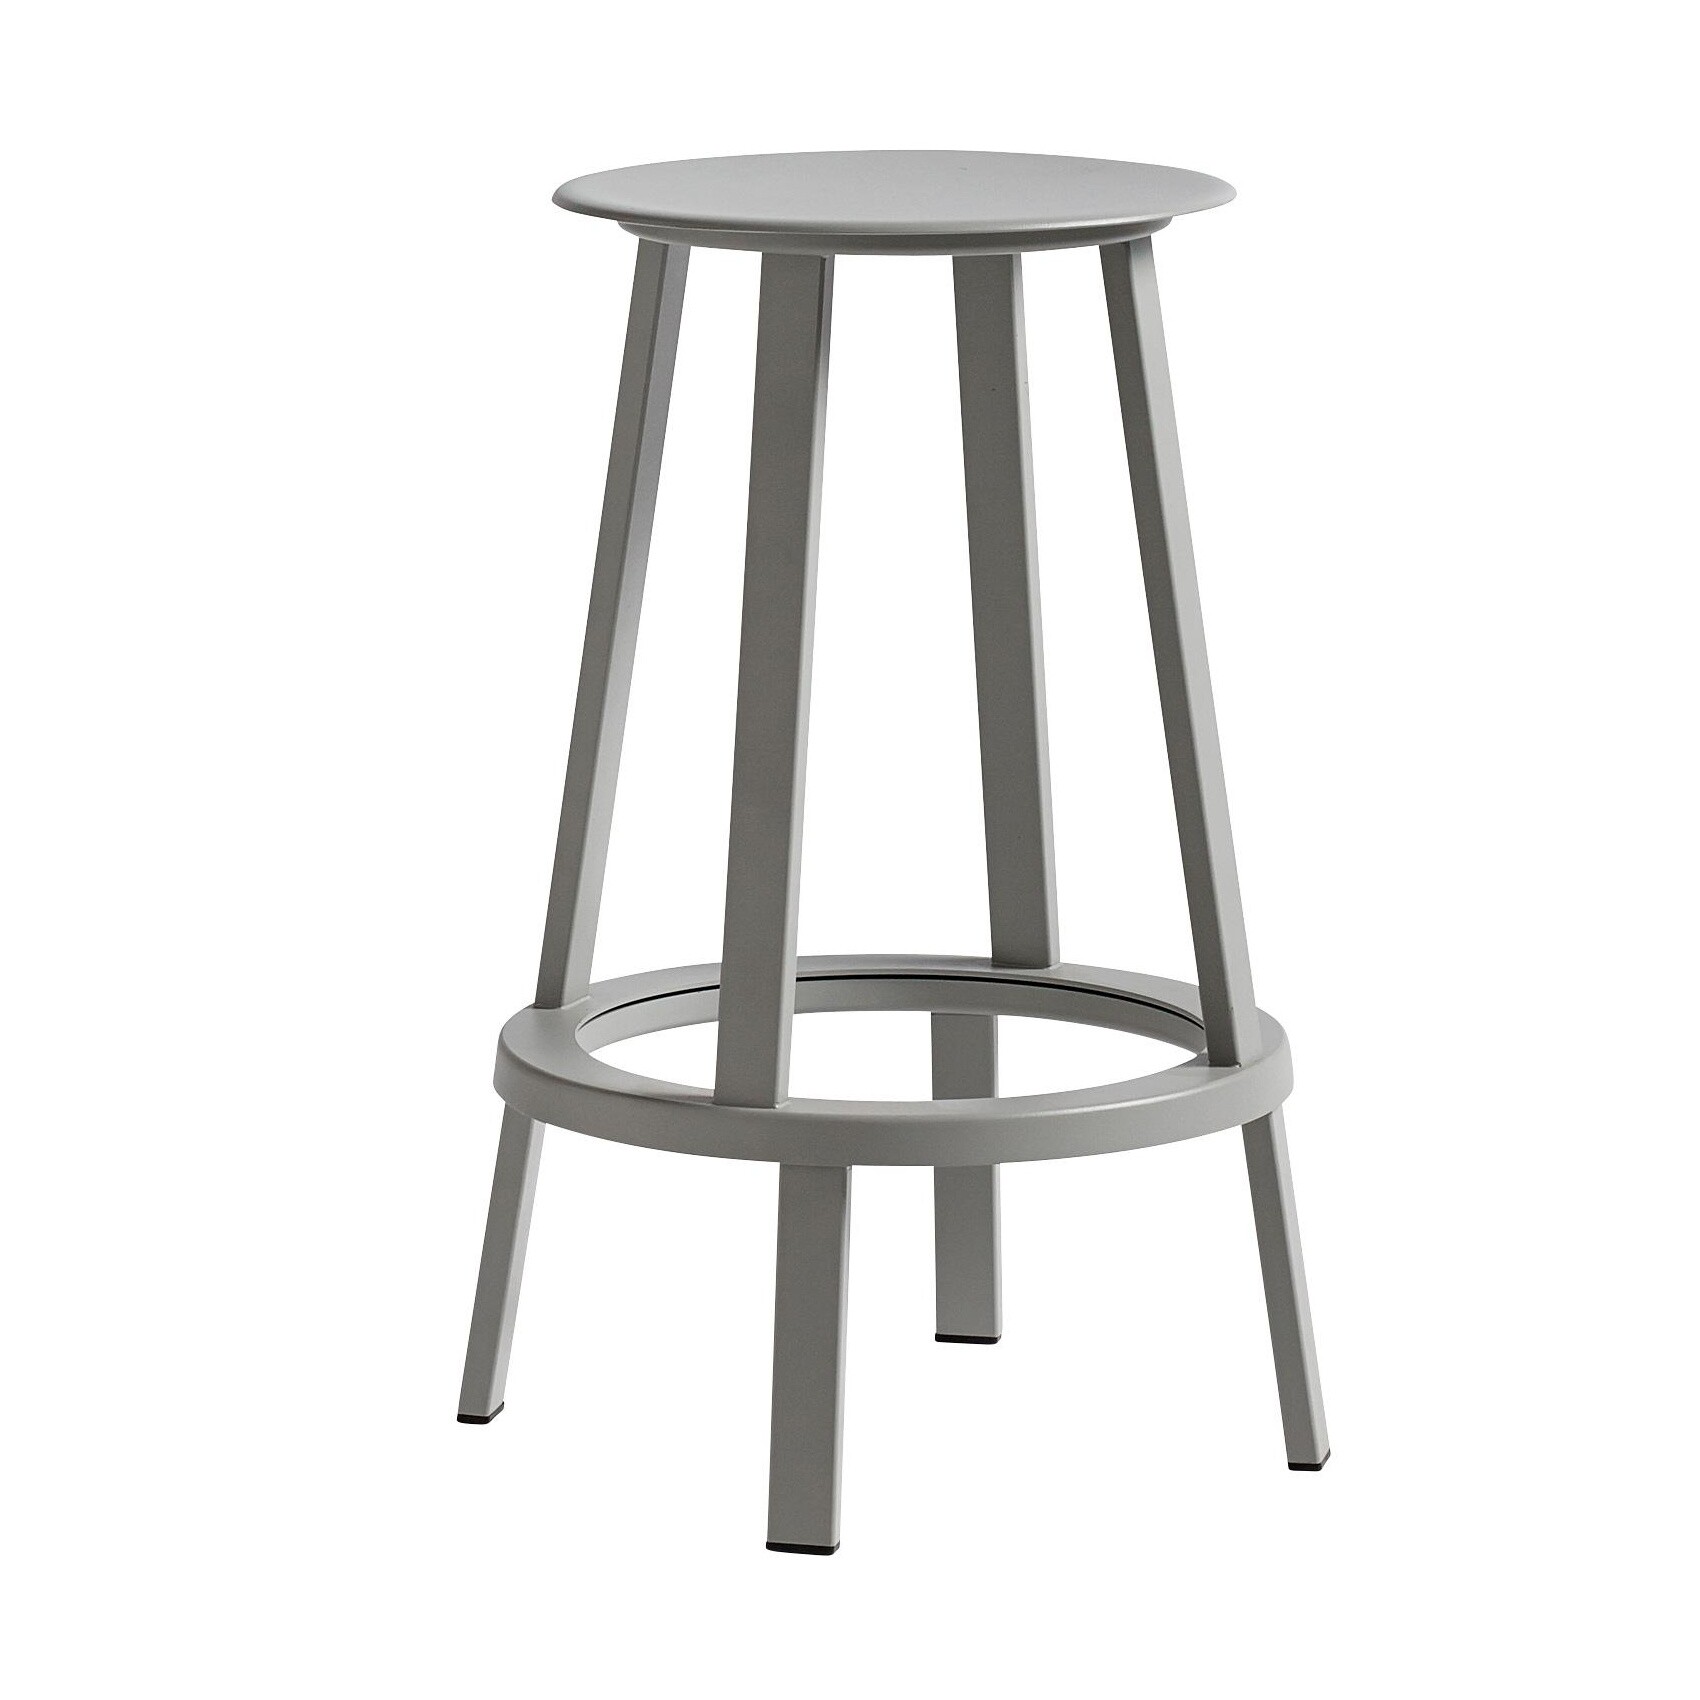 Hay Revolver Bar Stool Low Ambientedirect, How To Cut Metal Bar Stools Down